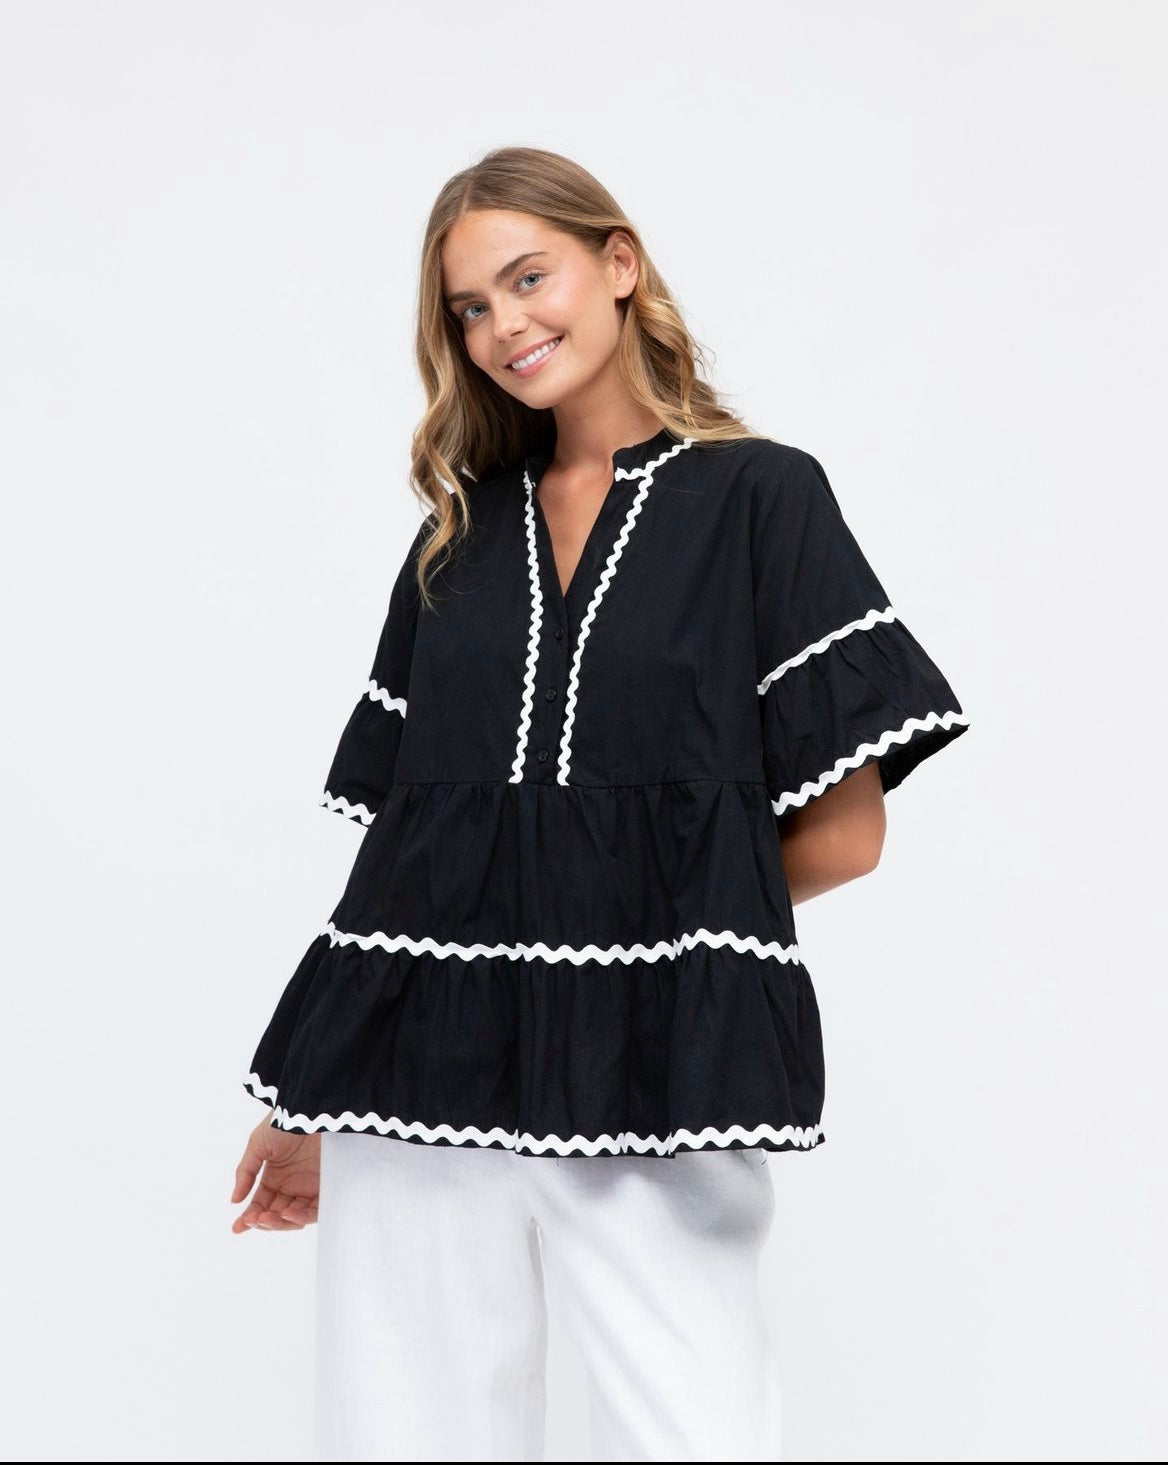 Black Top with white ric rac embroidery